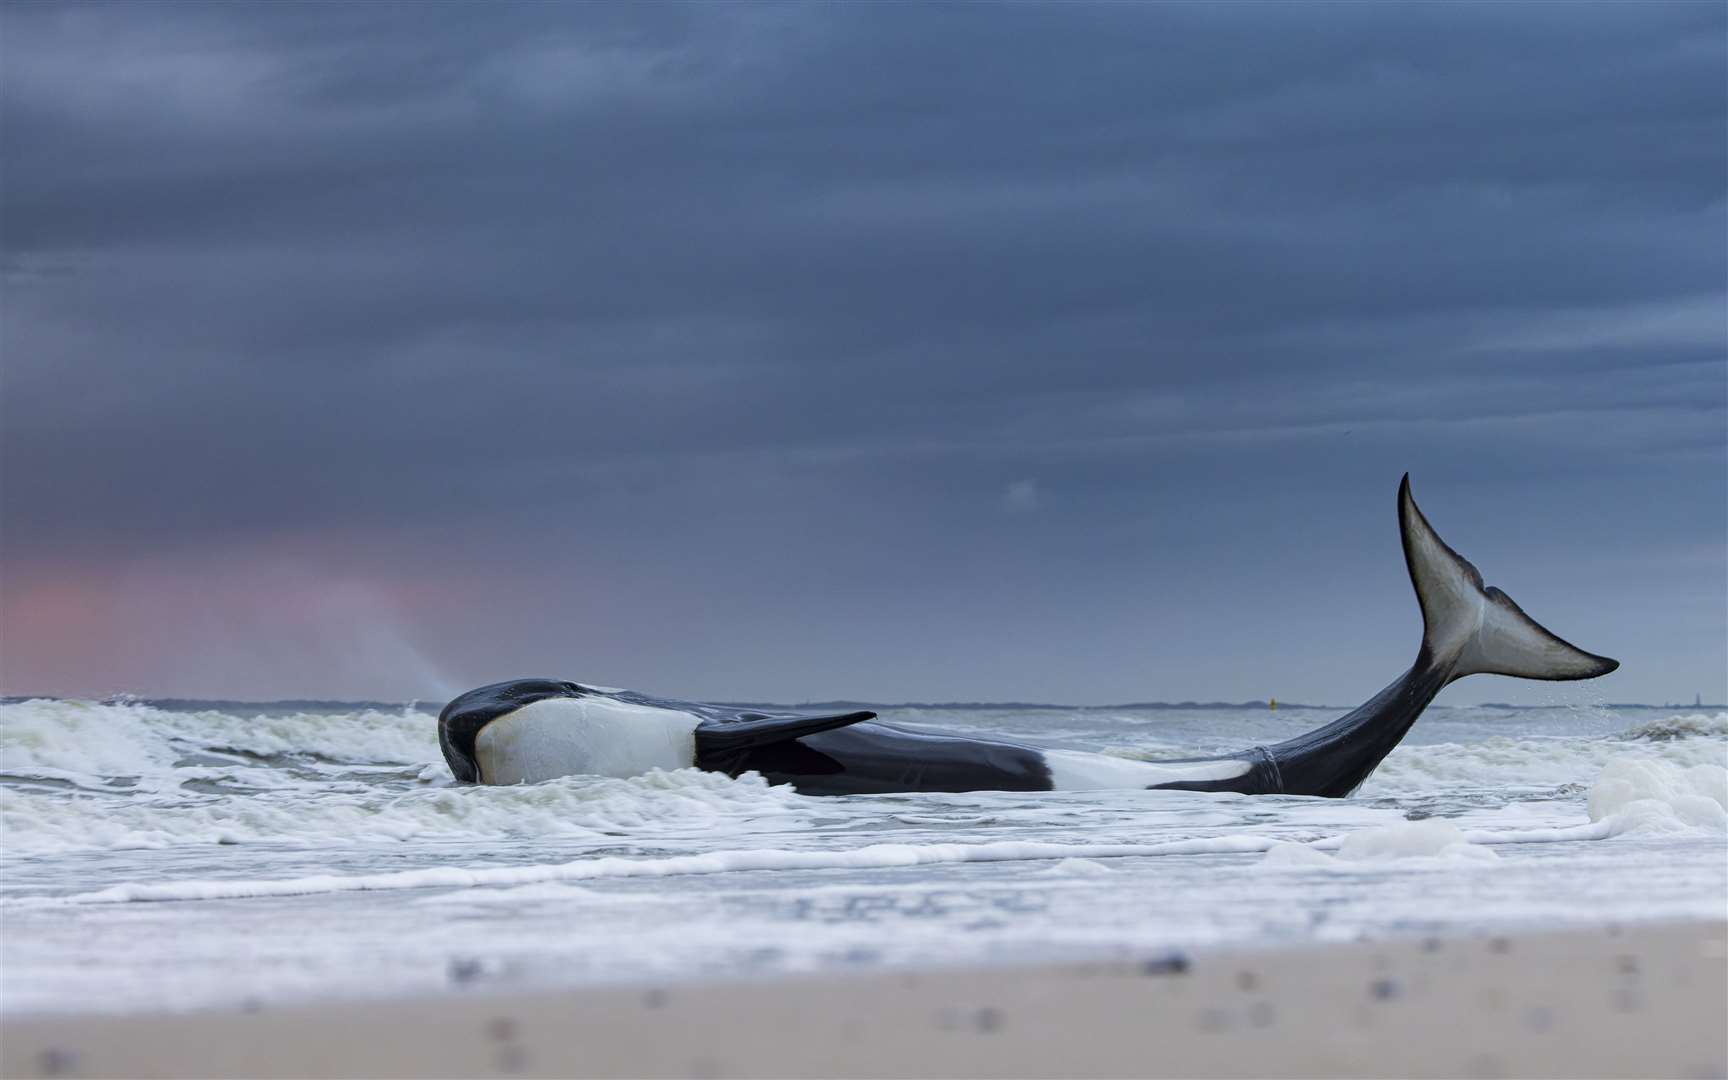 This beached orca was later found to be sick and malnourished, likely from industrial chemical poisoning (Lennart Verheuvel/Wildlife Photographer of the Year/PA)